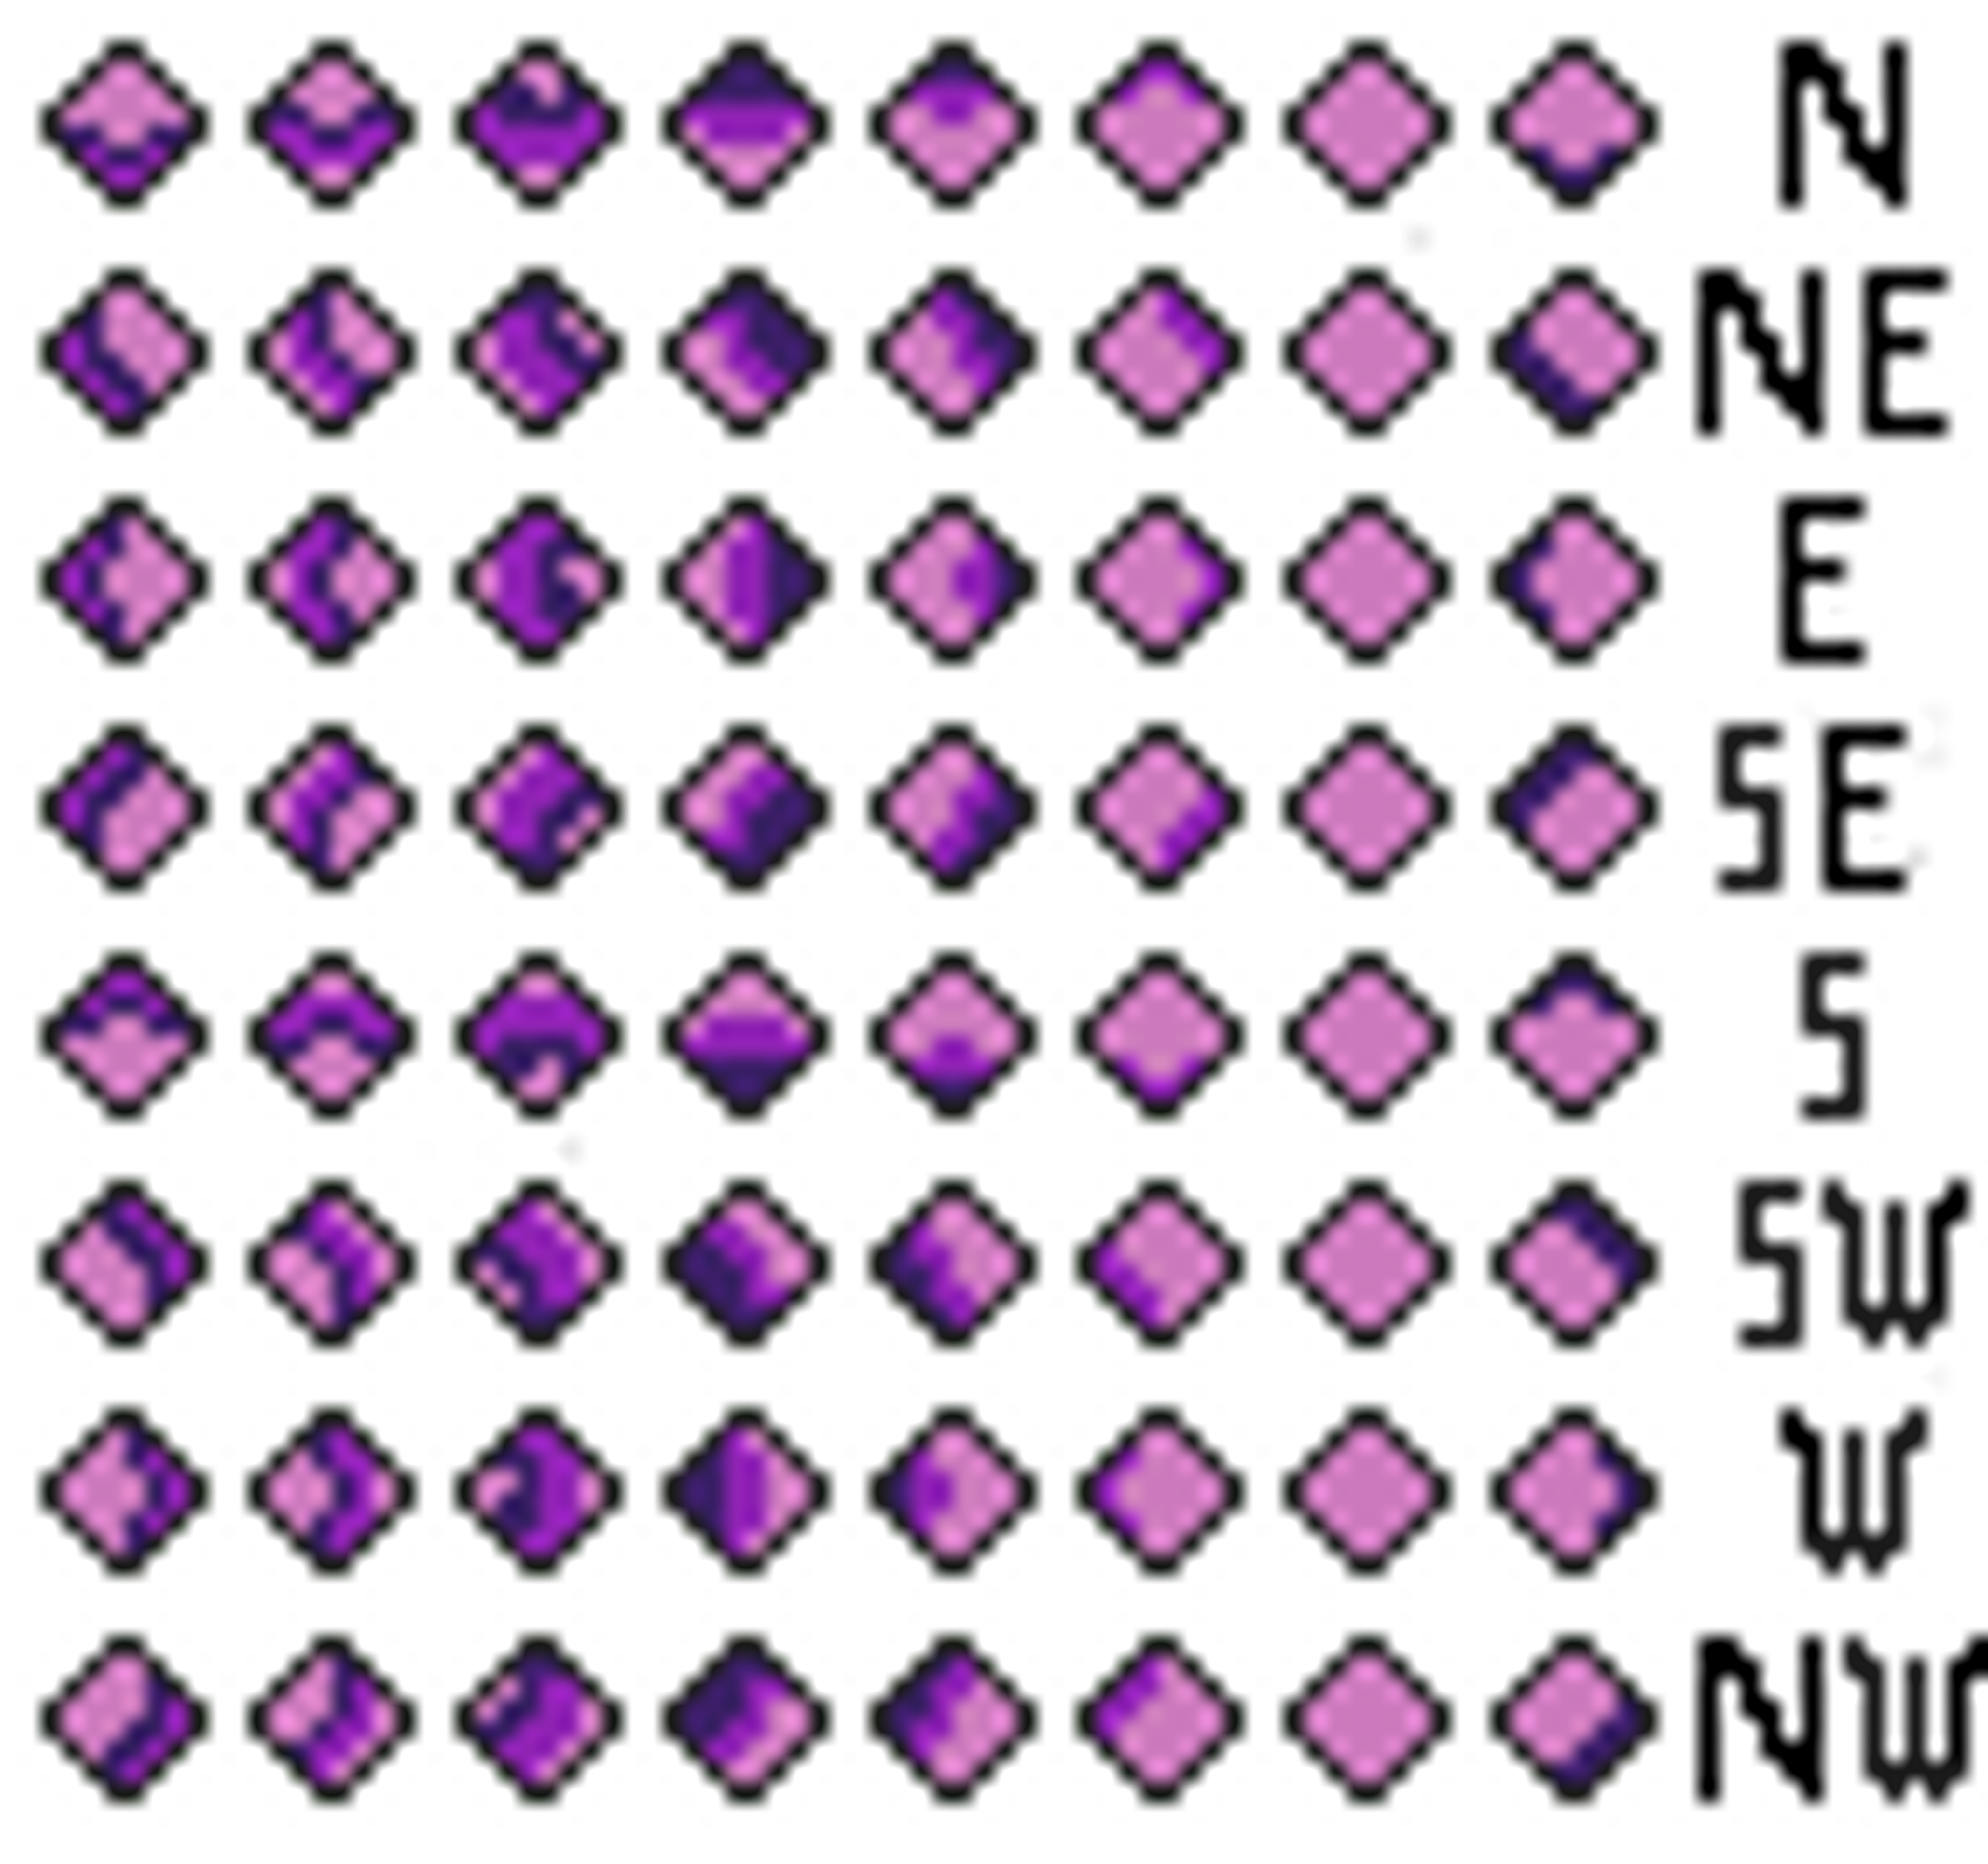 Sprite sheet of projectiles in png format.